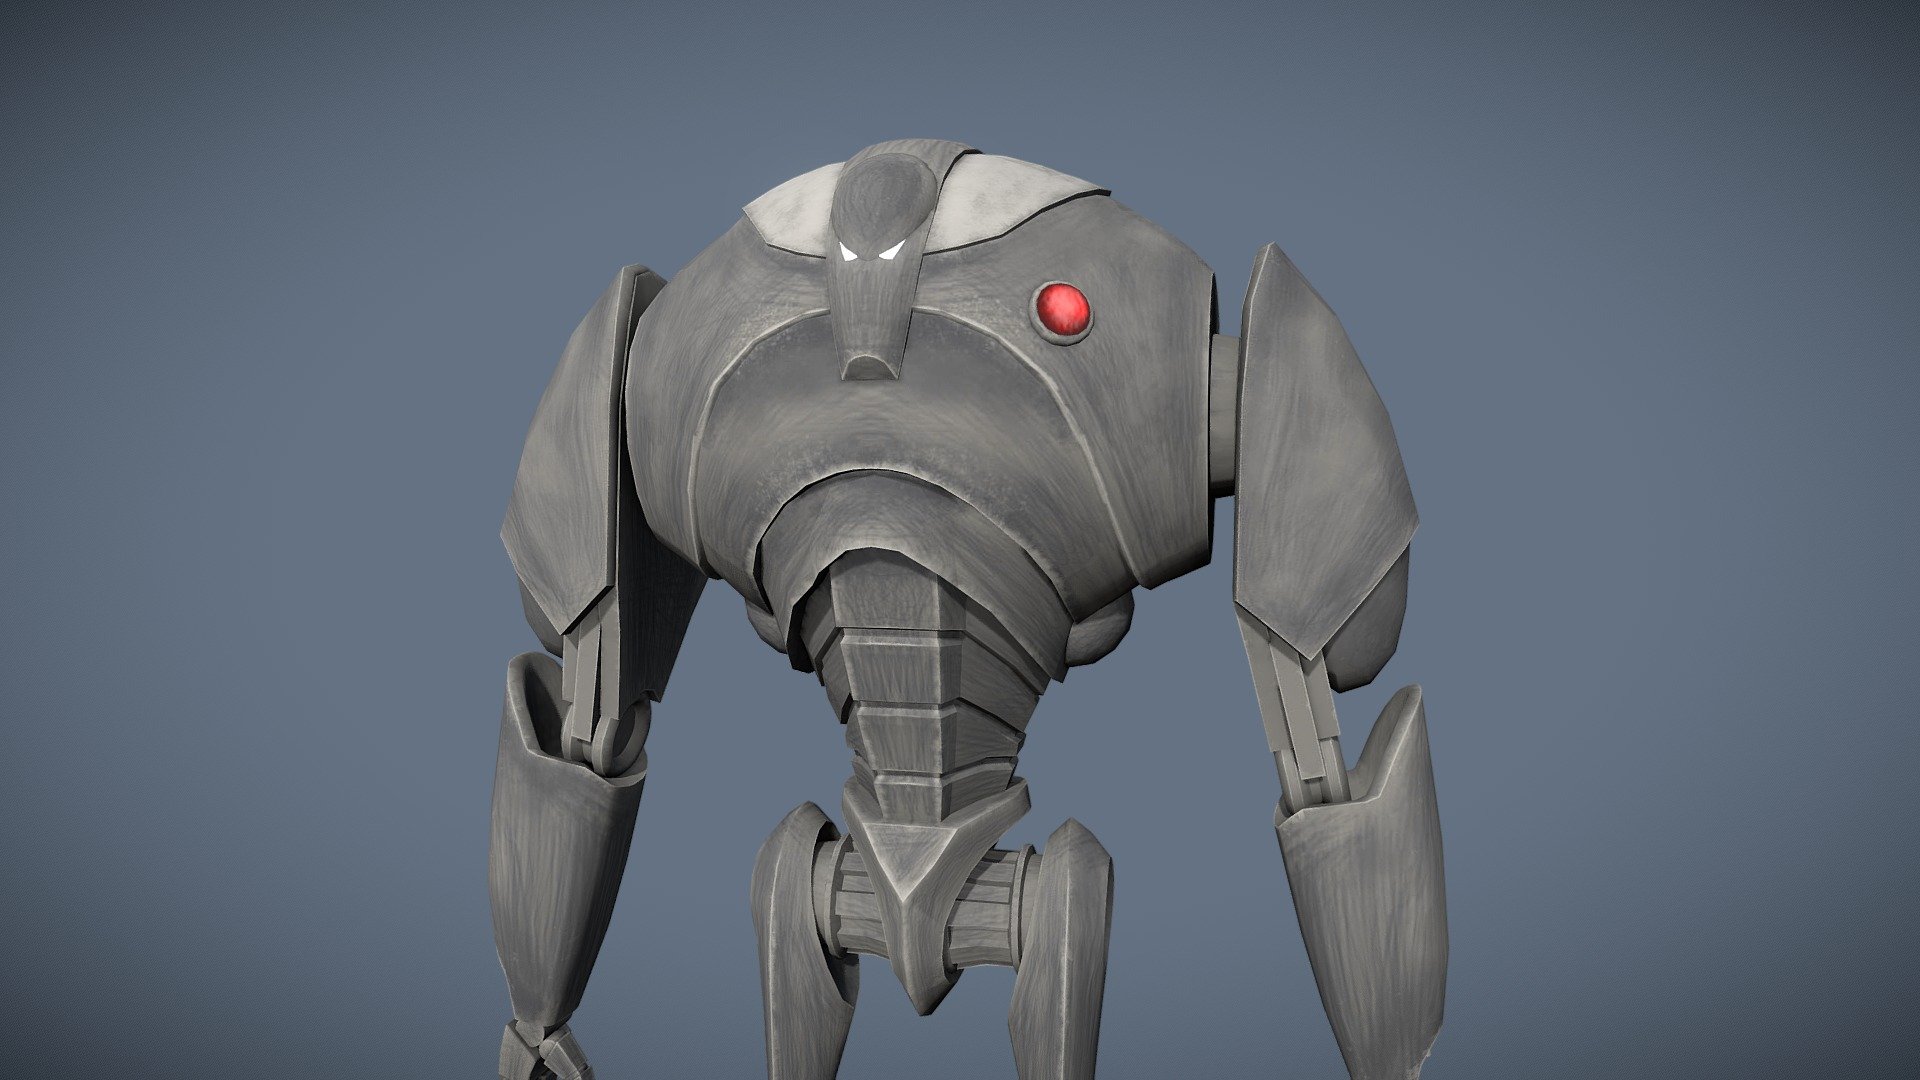 B2 Super Battledroid Fanart from the clone wars season 1. This is a fully rigged low poly game asset with IK and FK controls for all 4 limbs. This was made in Blender.

I am selling this for $15 AUD.

Email: eddie.roach751@gmail.com
Discord: https://discord.gg/Bc4mM5gr
Artstation: https://www.artstation.com/eddieroach
Instagram: @eddie_a_roach - B2 Super Battle Droid | Low Poly | Clone Wars S1 - 3D model by Eddie Roach (@eddie.roach) 3d model